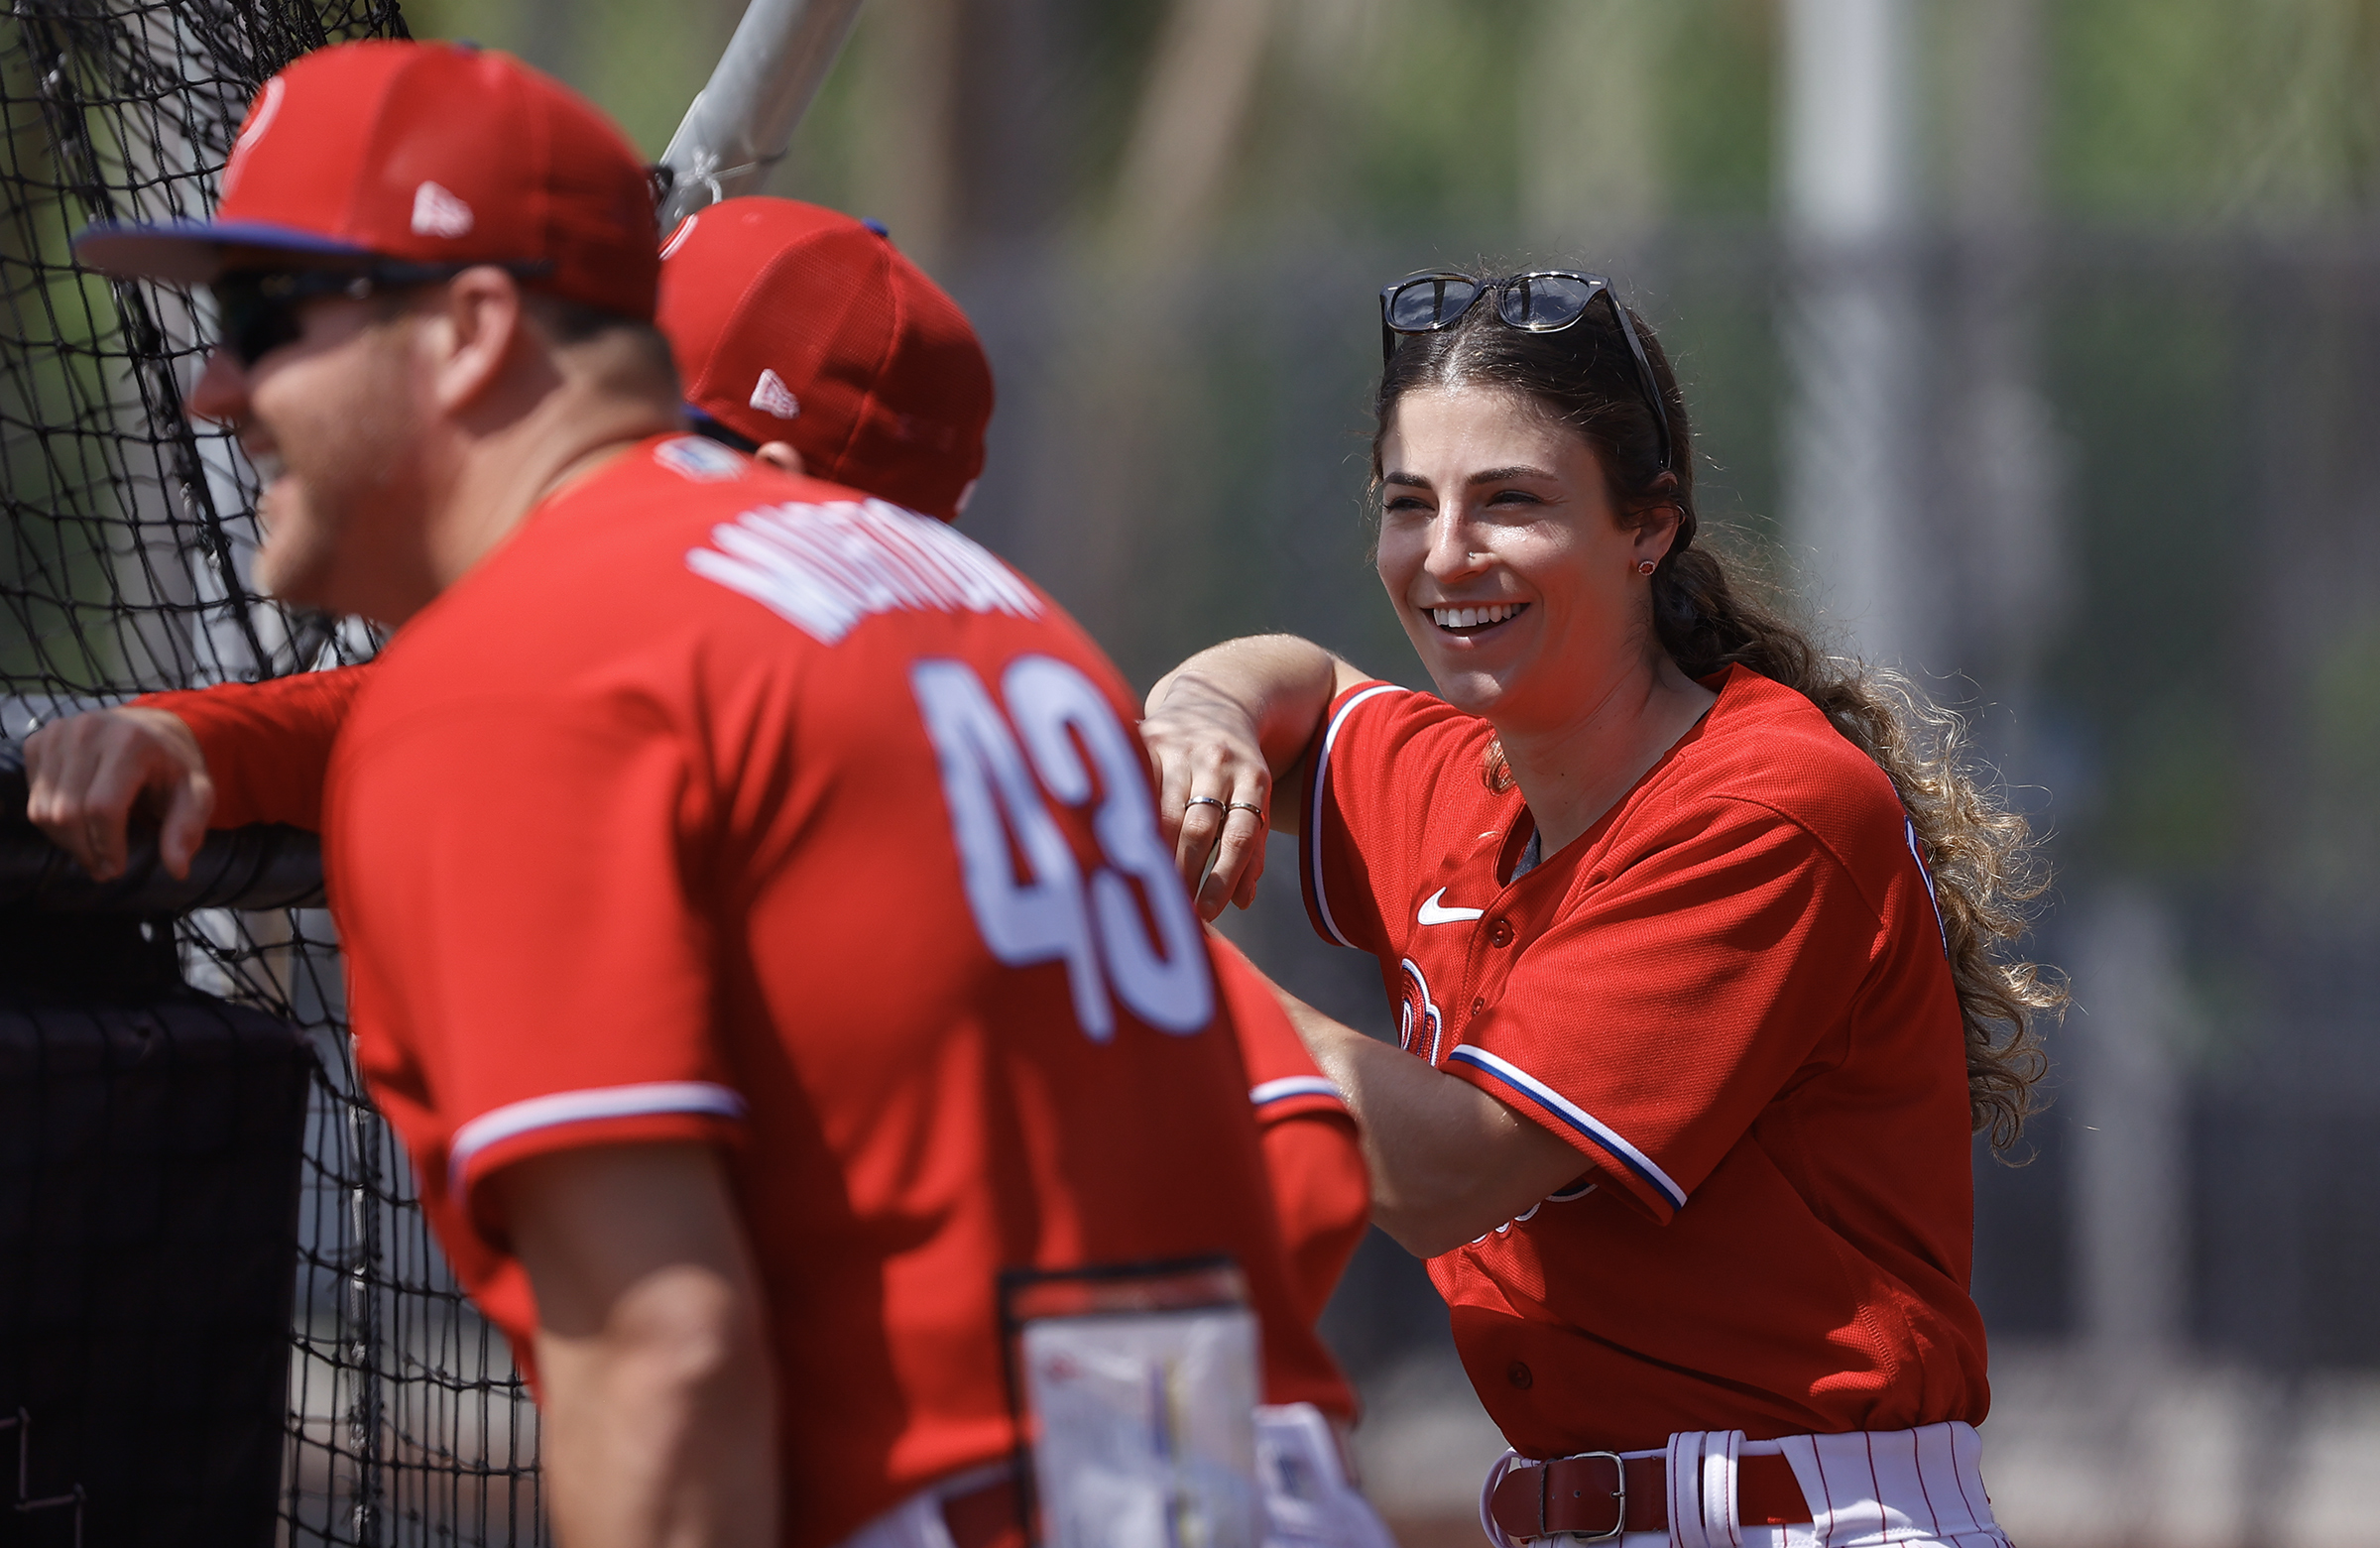 Phillies 2023 player development staff includes Sarah Edwards, the